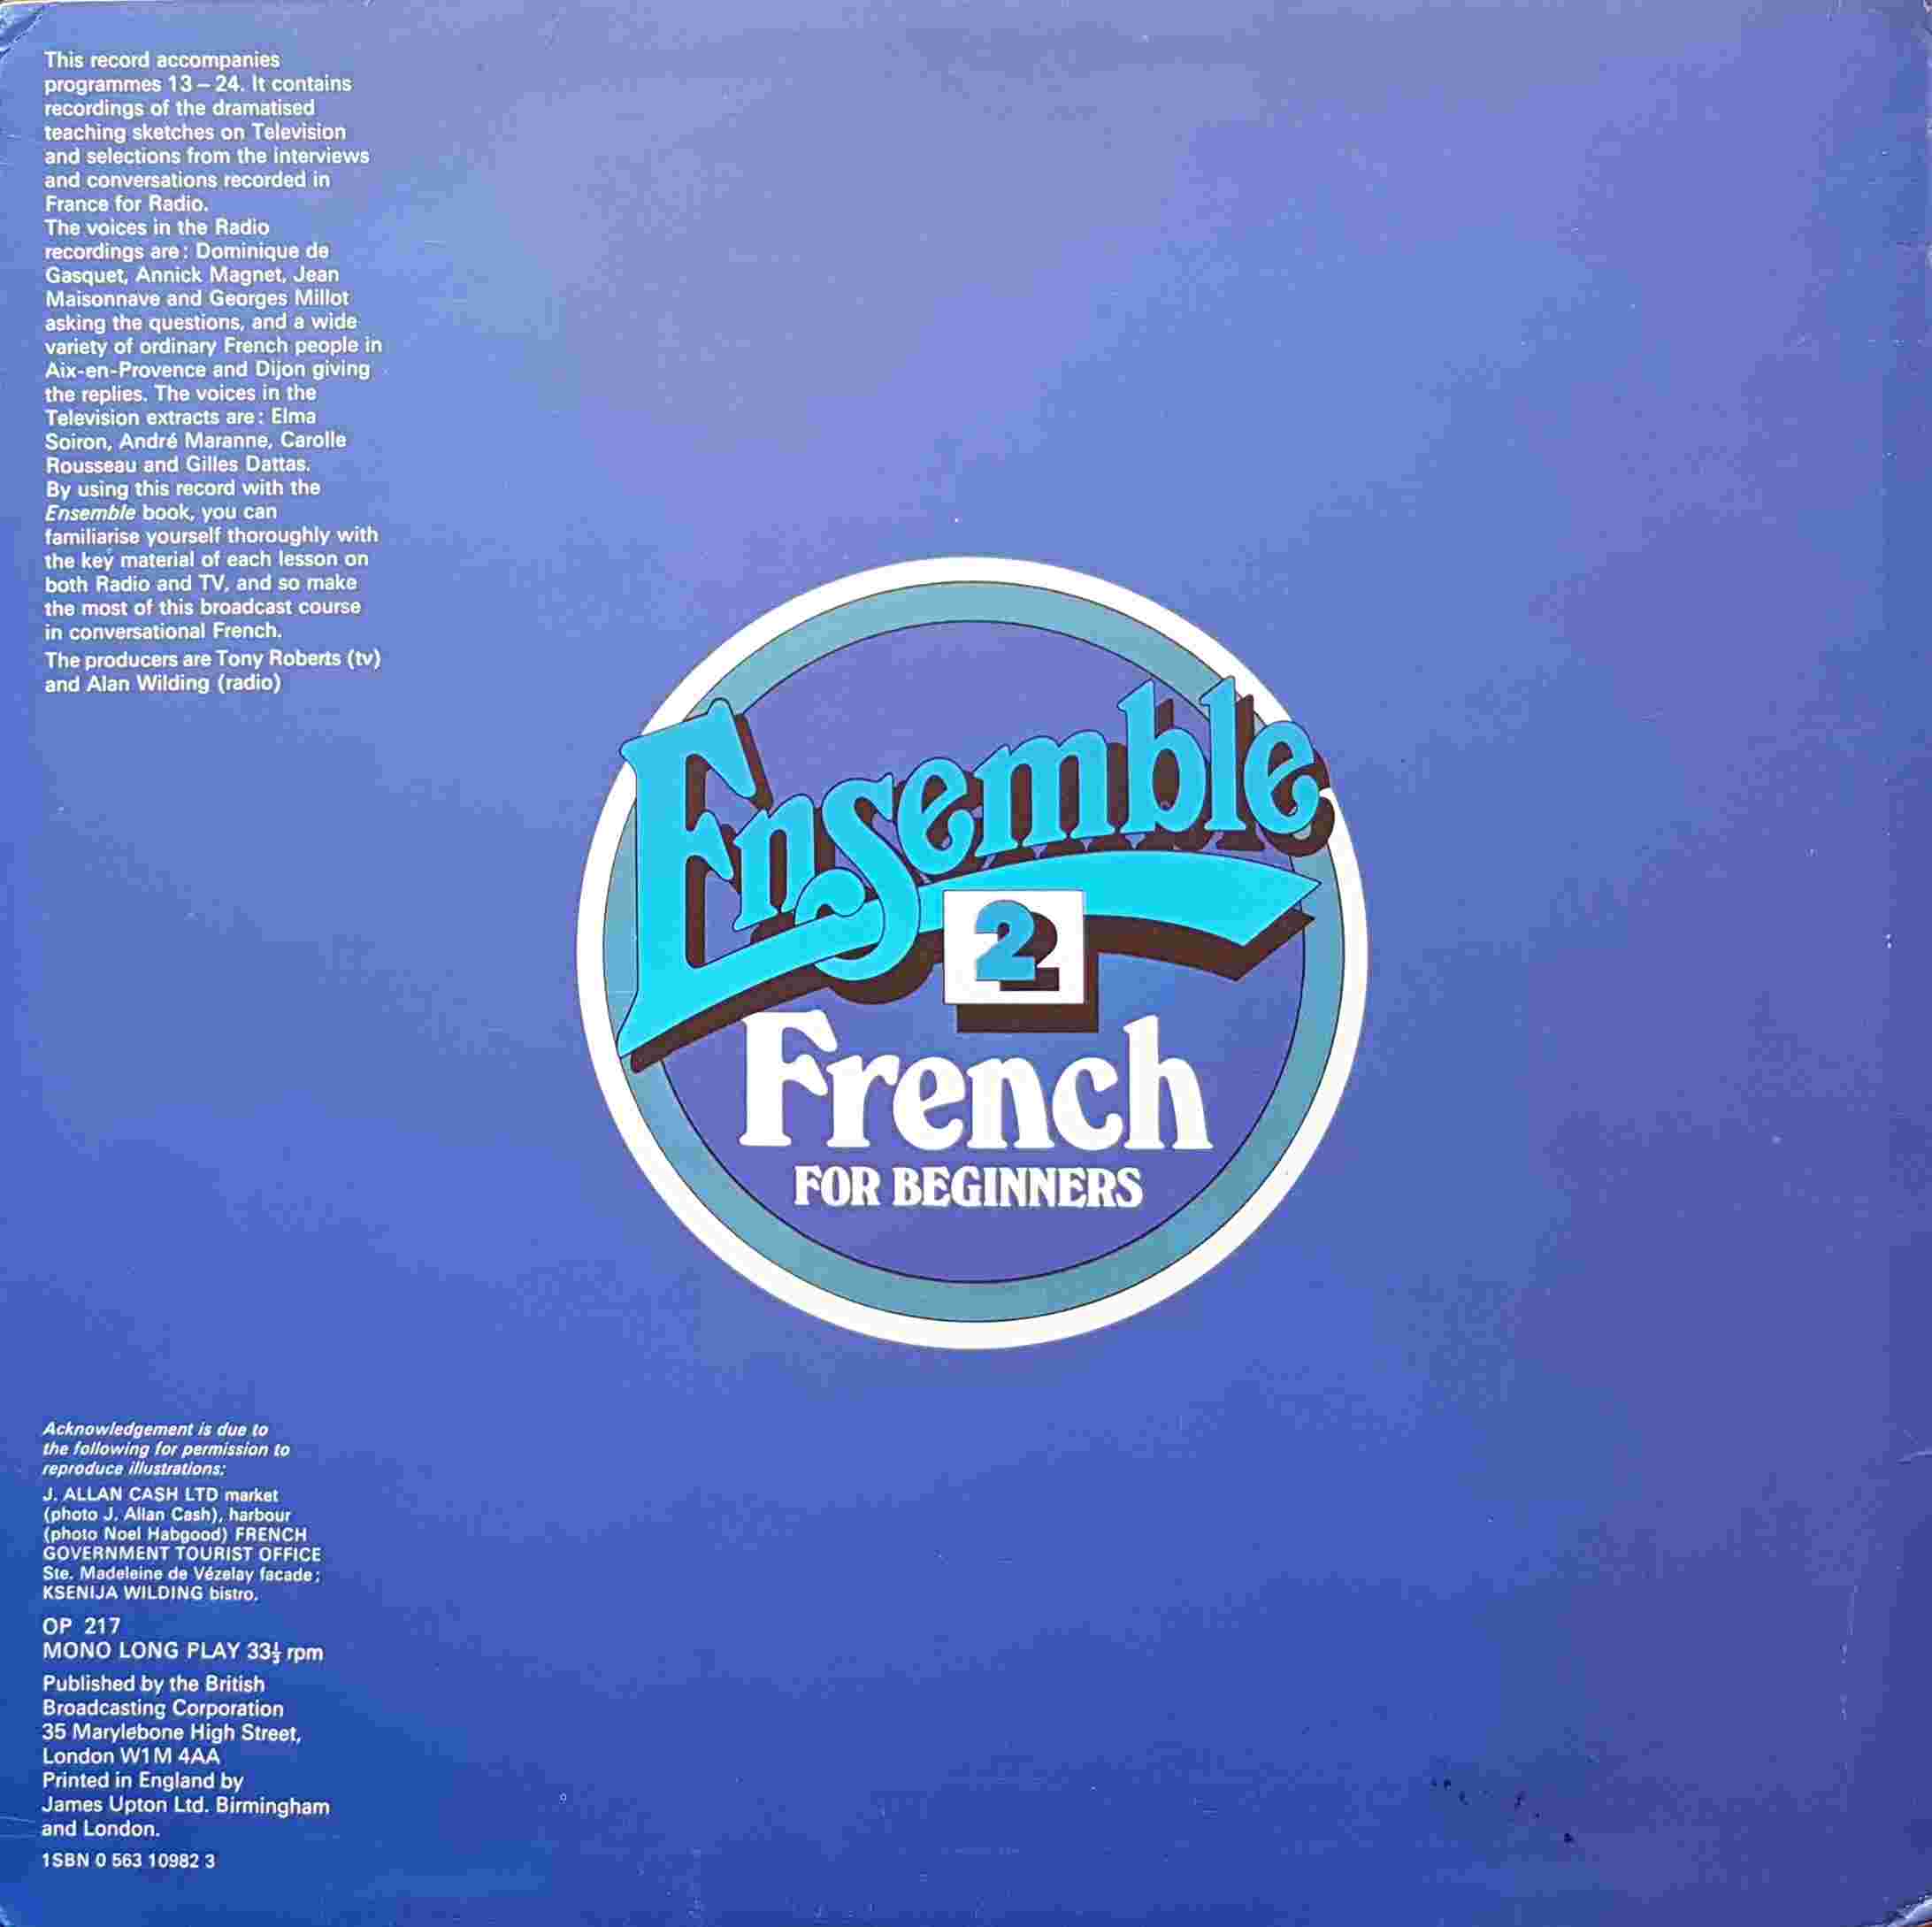 Picture of OP 217 Ensemble 2 - French for beginners - Programmes 13 - 24 by artist Various from the BBC records and Tapes library